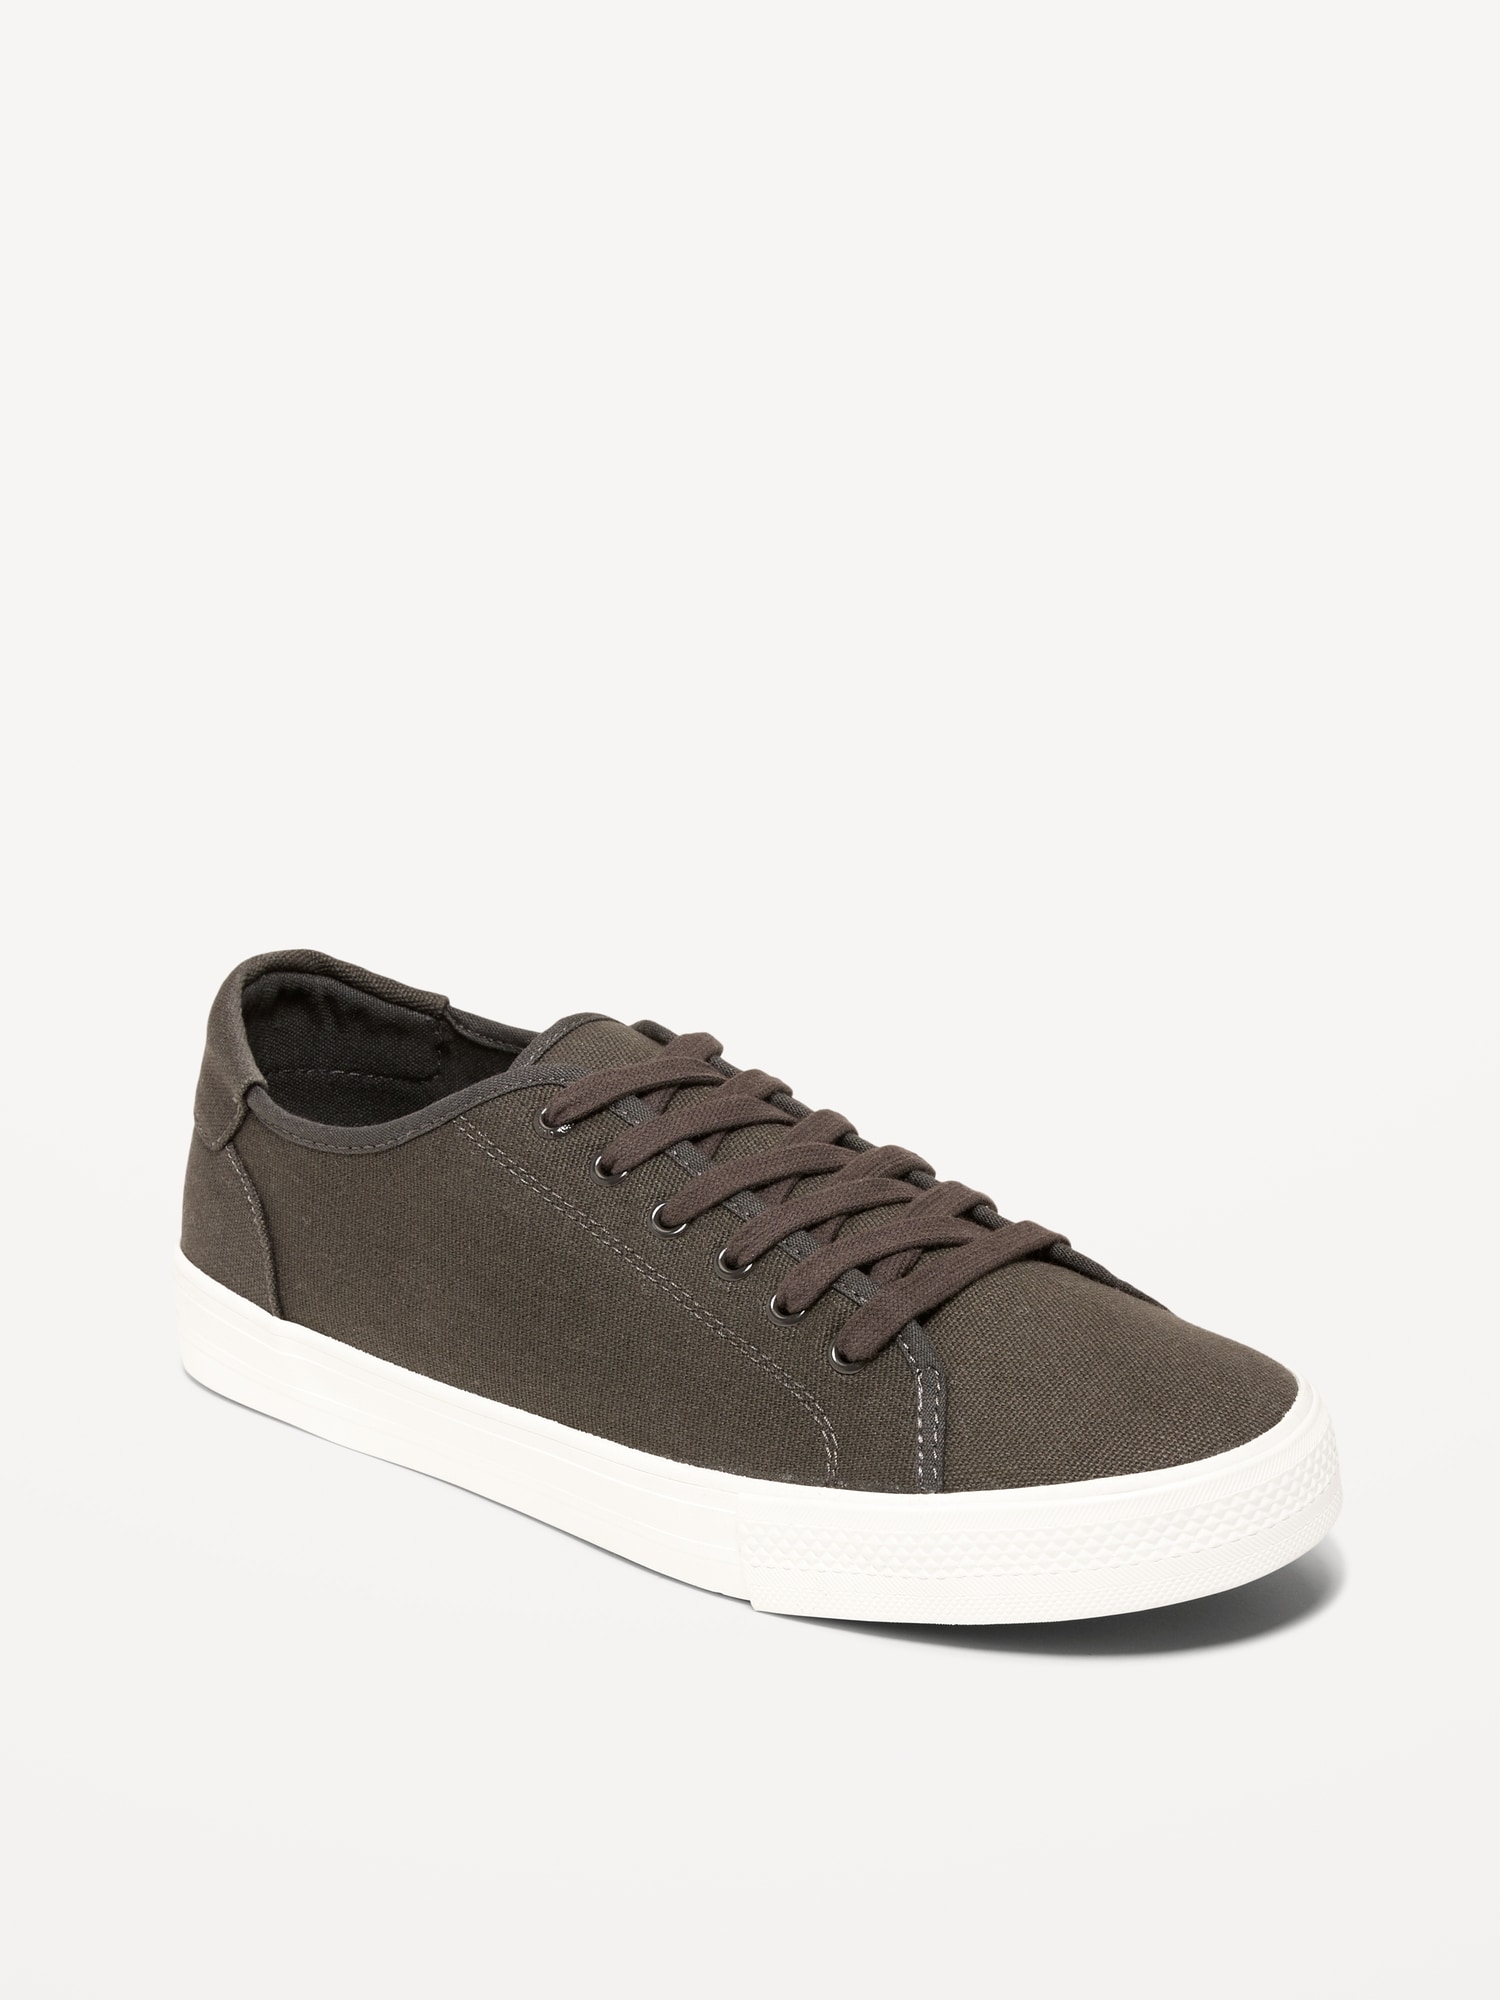 Old Navy Canvas Lace-Up Sneakers for Men black. 1